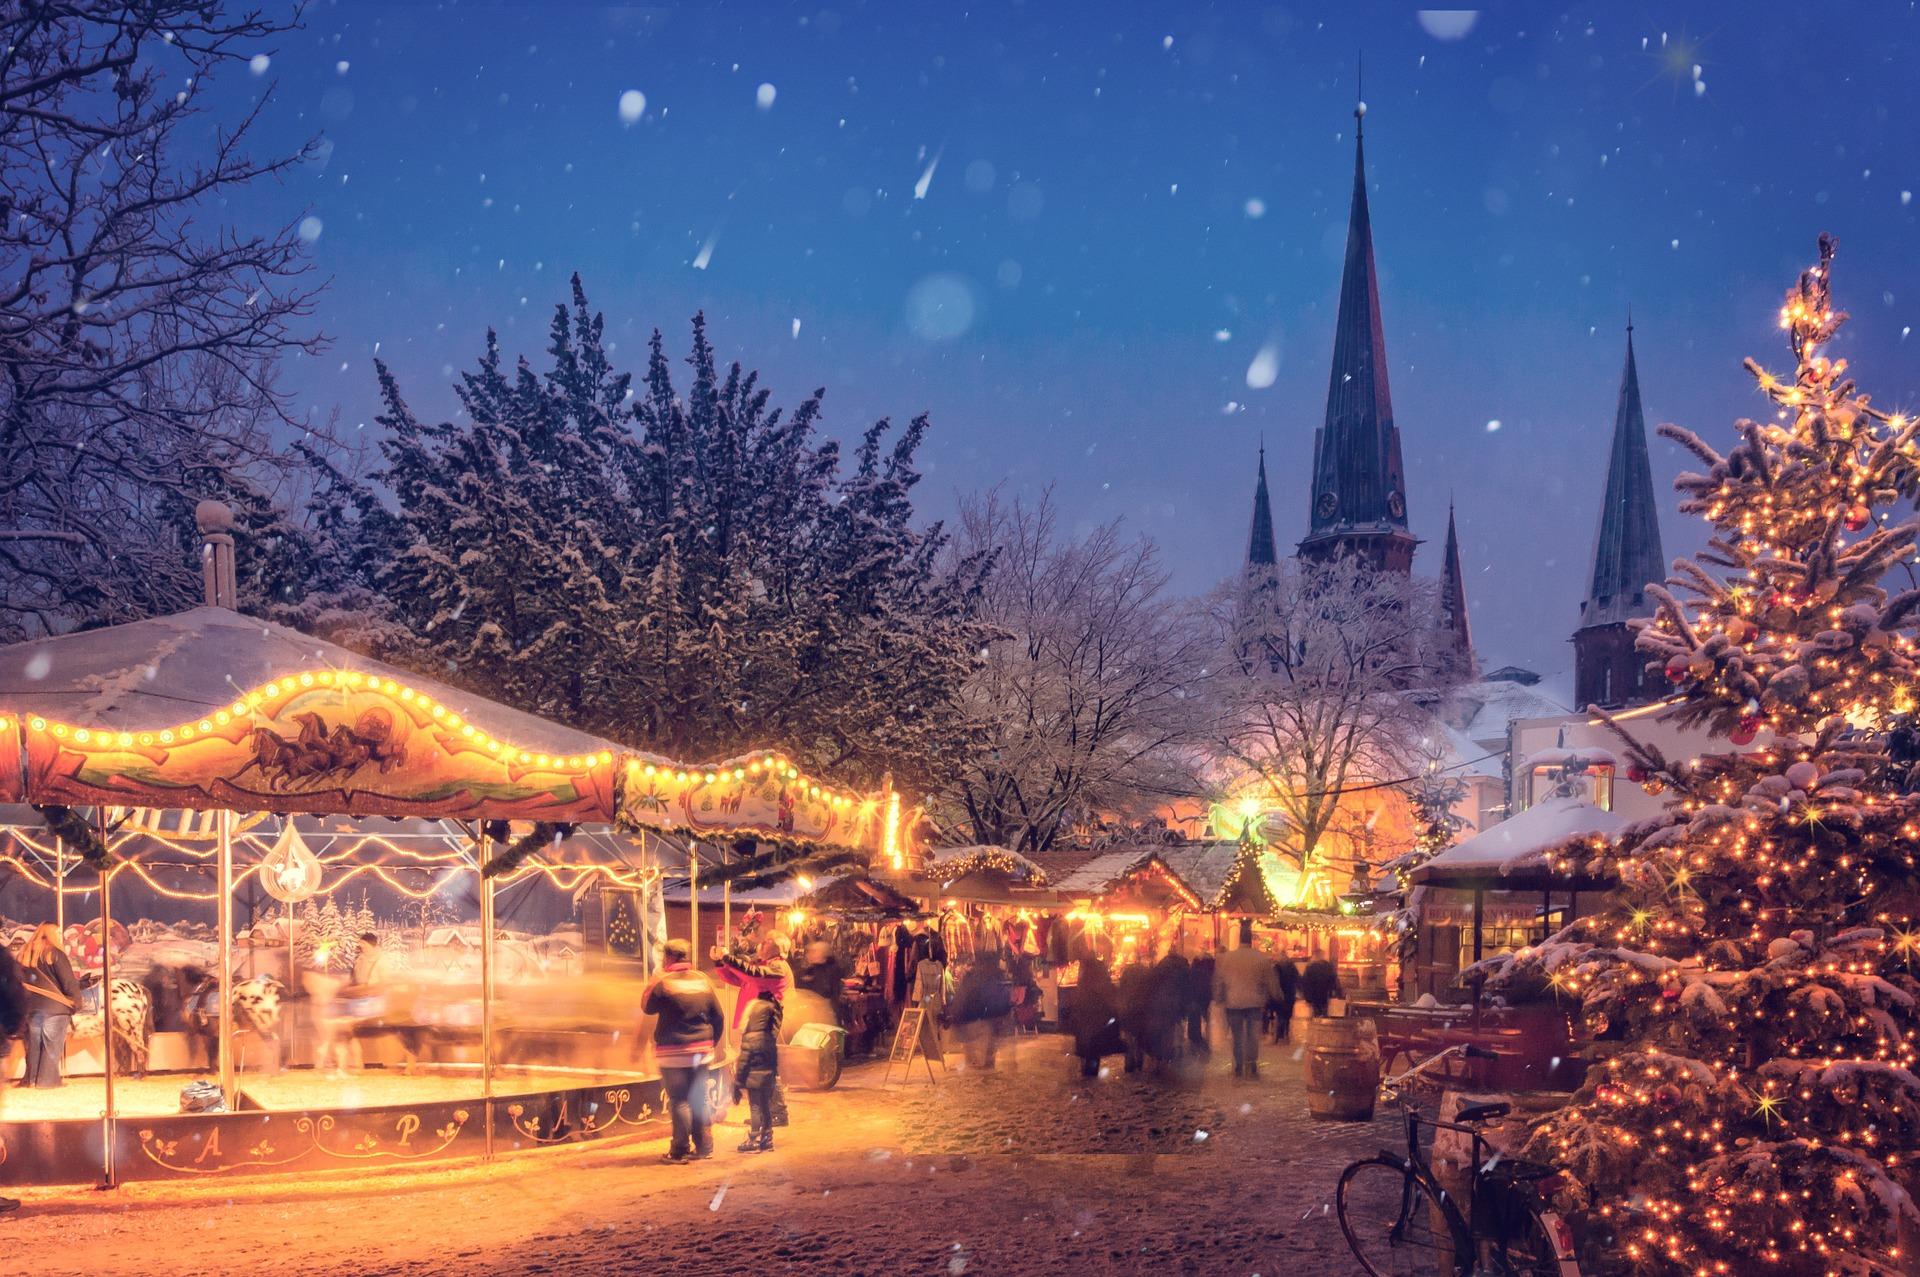 Journey to Europe & Experience the Christmas Markets